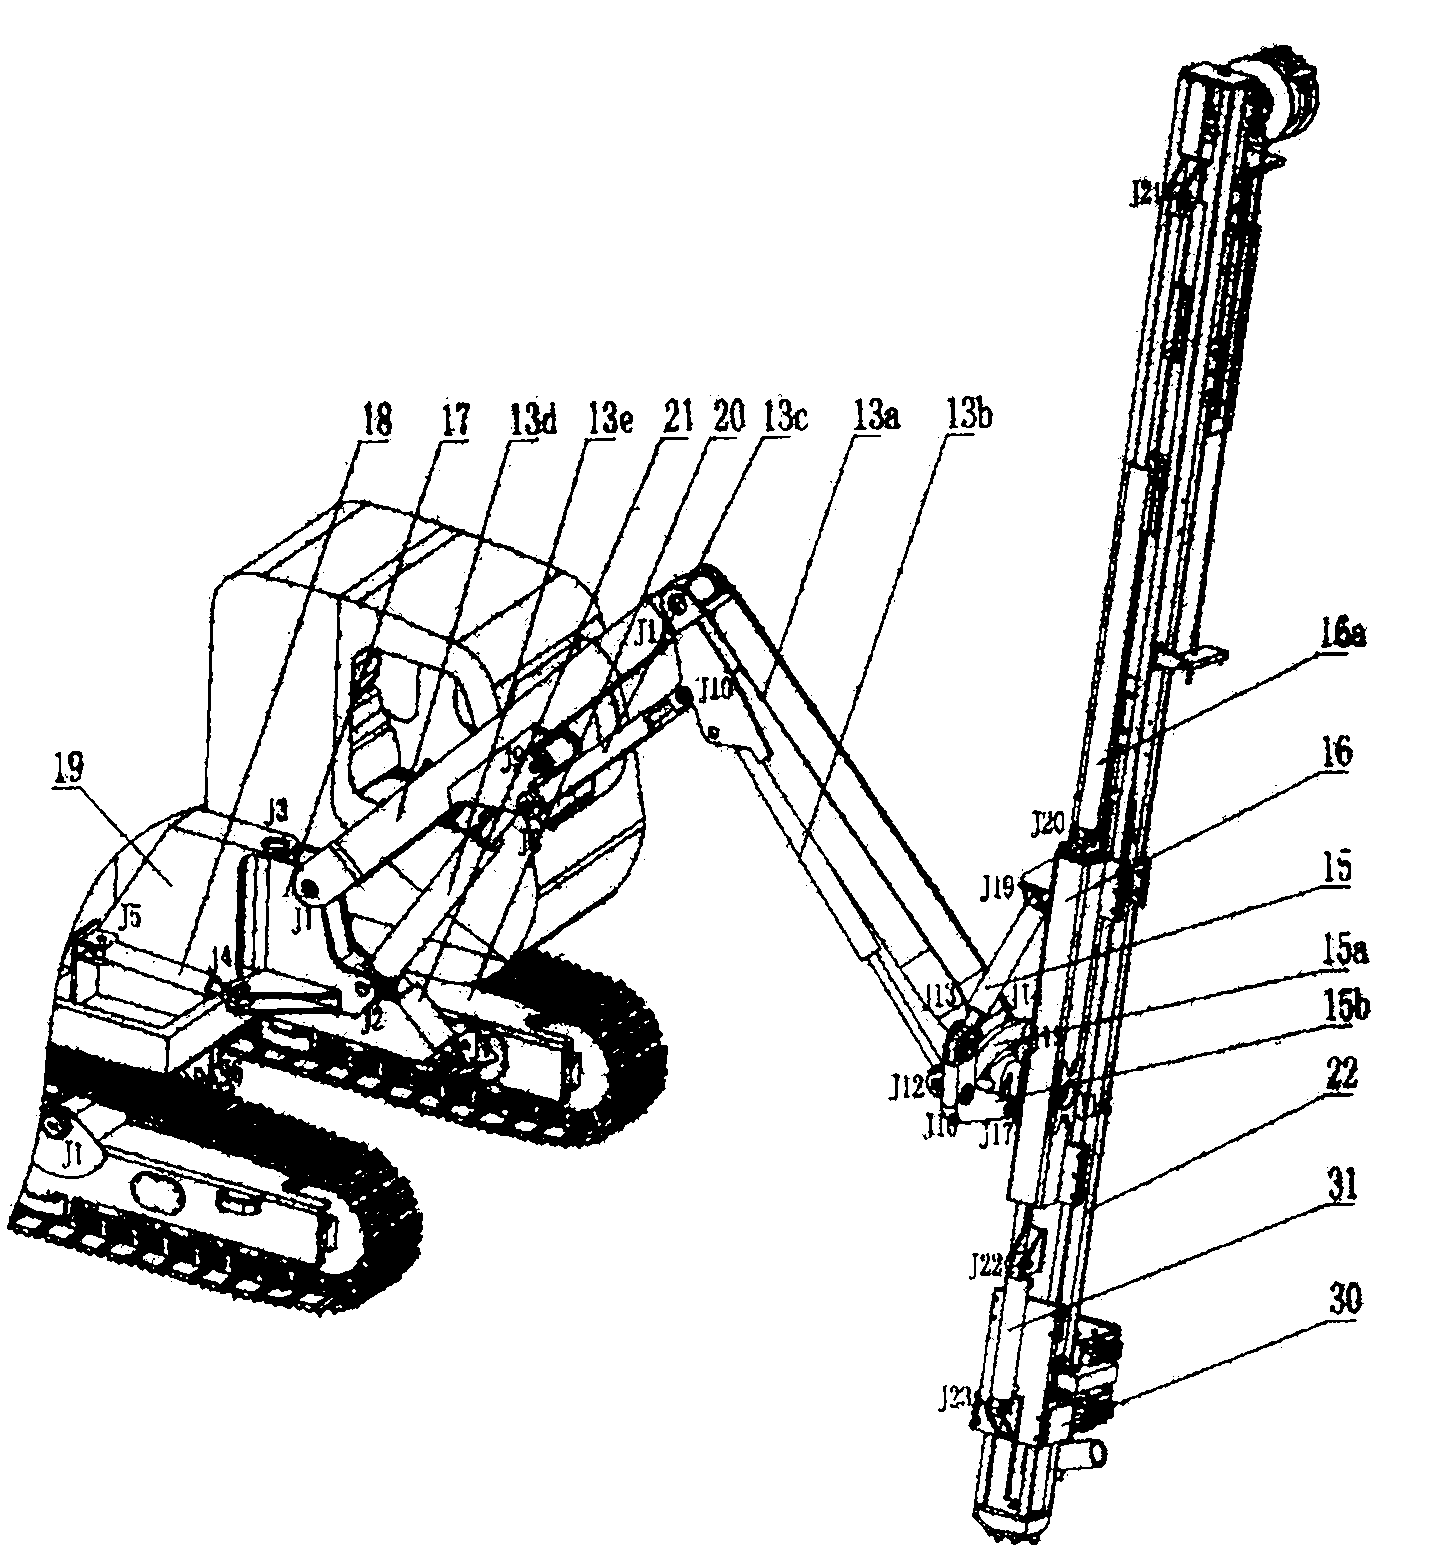 Multidirectional hydraulic rock drilling machine with integrated drives